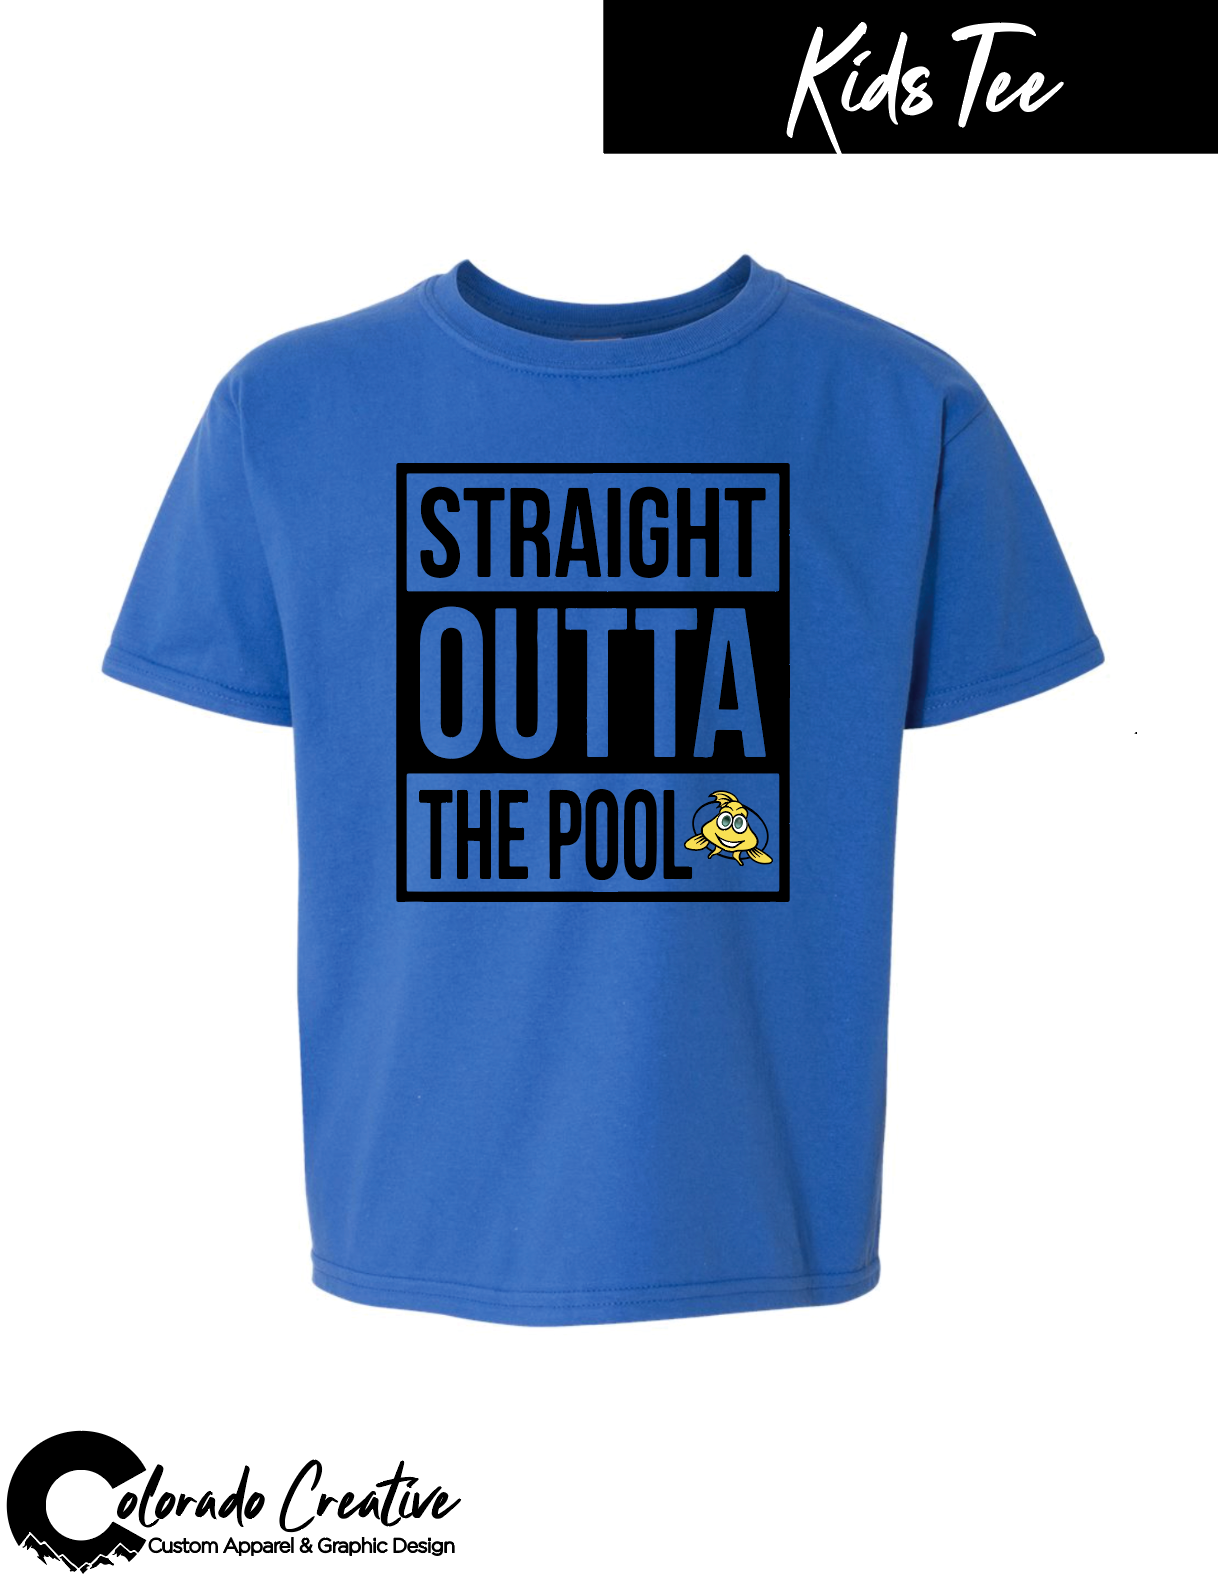 LITTLE FINS YOUTH TEE "STRAIGHT OUTTA THE POOL"